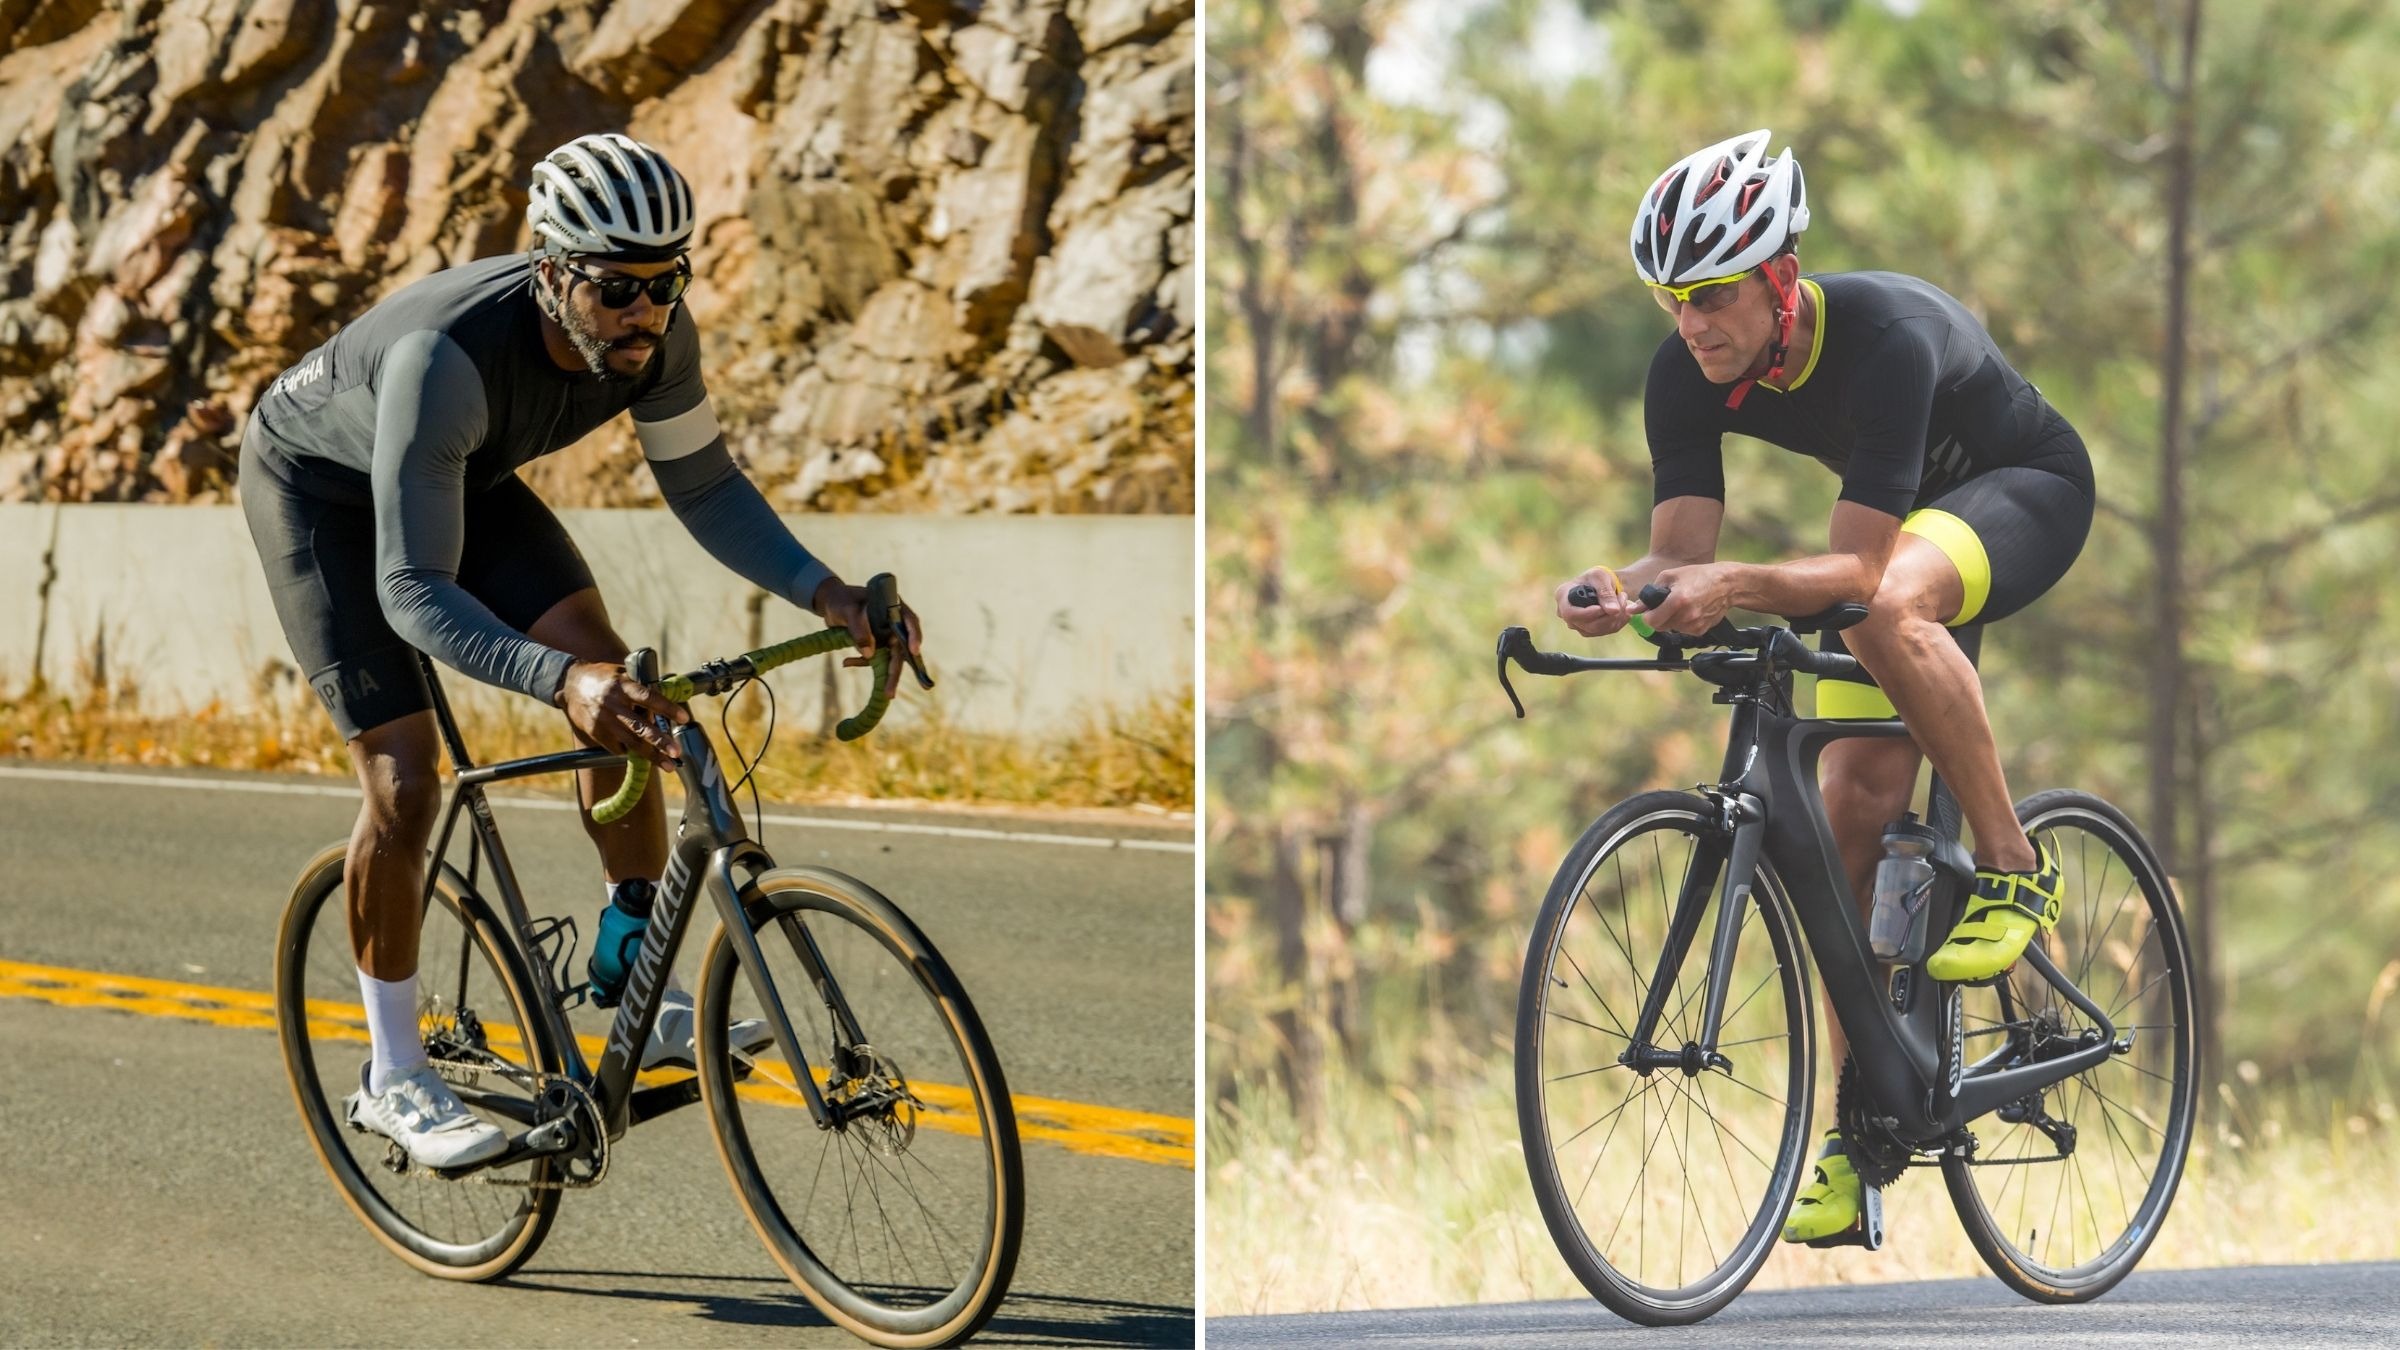 What Makes A Triathlon Bike Different From A Road Bike?